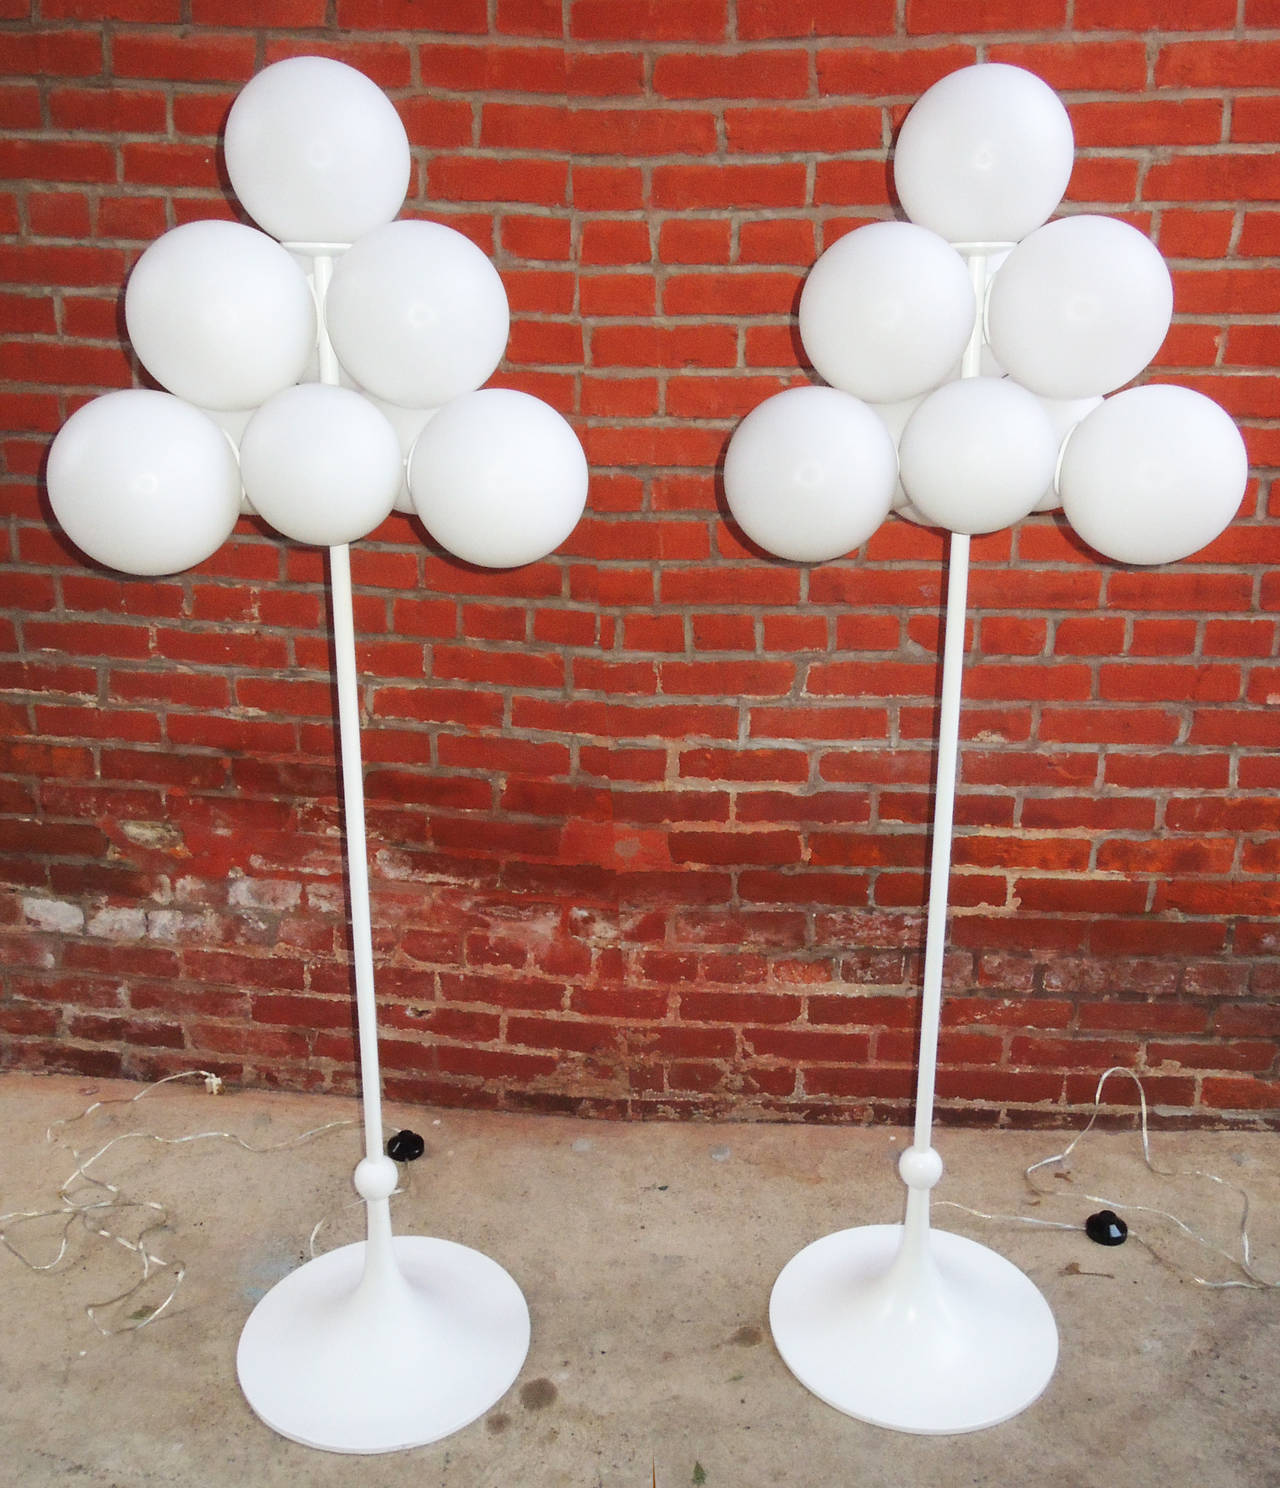 Pair of standing lamps by E.R. Nele. Ten separate white frosted glass globes screw in individually to cover bulbs. Attached to a white lacquered metal armature, with tulip shaped round foot.